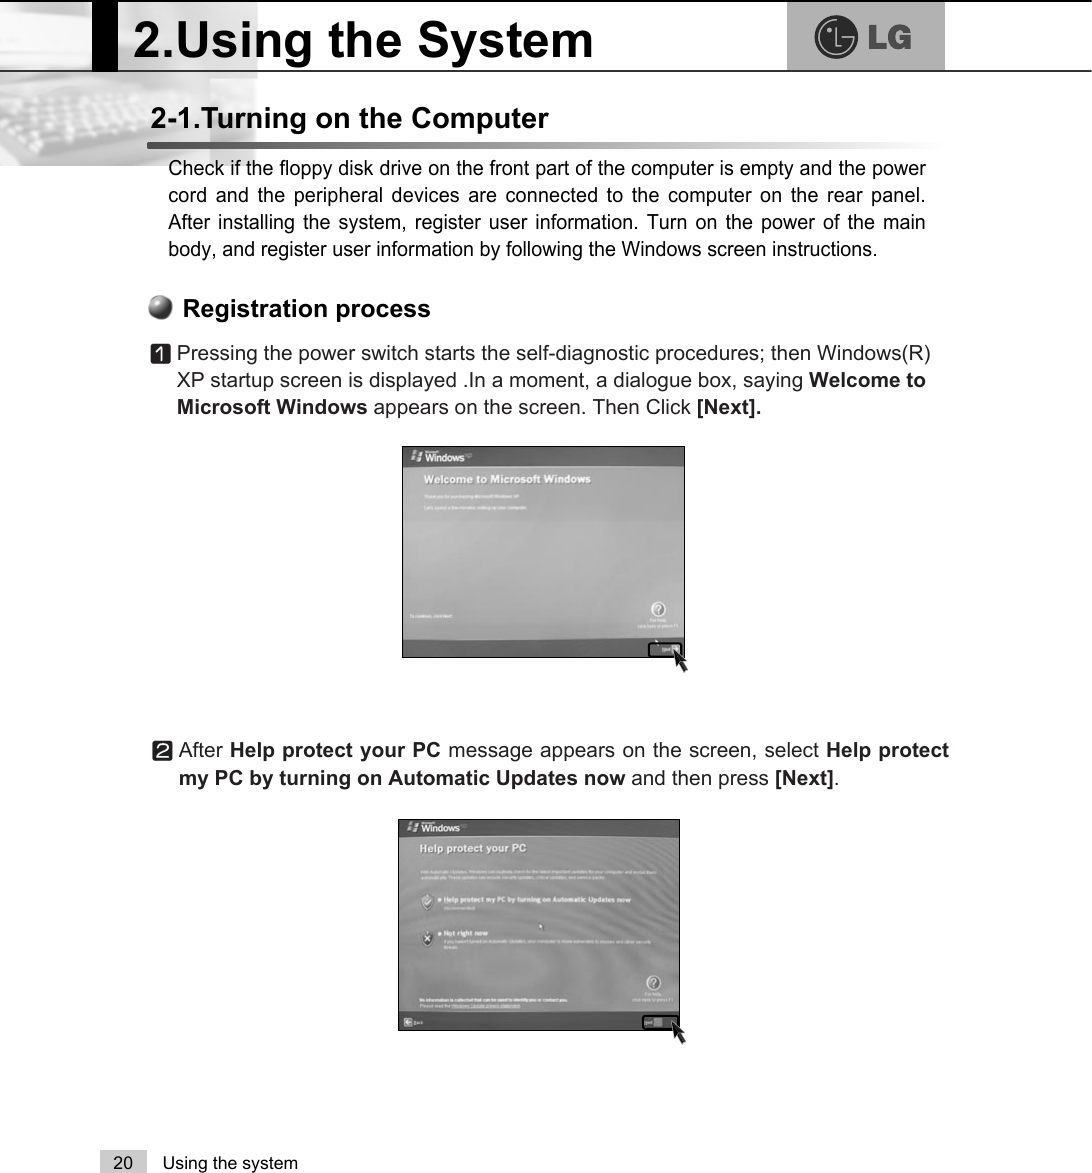 2.Using the System20 Using the systemCheck if the floppy disk drive on the front part of the computer is empty and the powercord and the peripheral devices are connected to the computer on the rear panel.After installing the system, register user information. Turn on the power of the mainbody, and register user information by following the Windows screen instructions.2-1.Turning on the ComputerⓞPressing the power switch starts the self-diagnostic procedures; then Windows(R)XP startup screen is displayed .In a moment, a dialogue box, saying Welcome toMicrosoft Windows appears on the screen. Then Click [Next].Registration processⓟAfter Help protect your PC message appears on the screen, select Help protectmy PC by turning on Automatic Updates now and then press [Next]. 